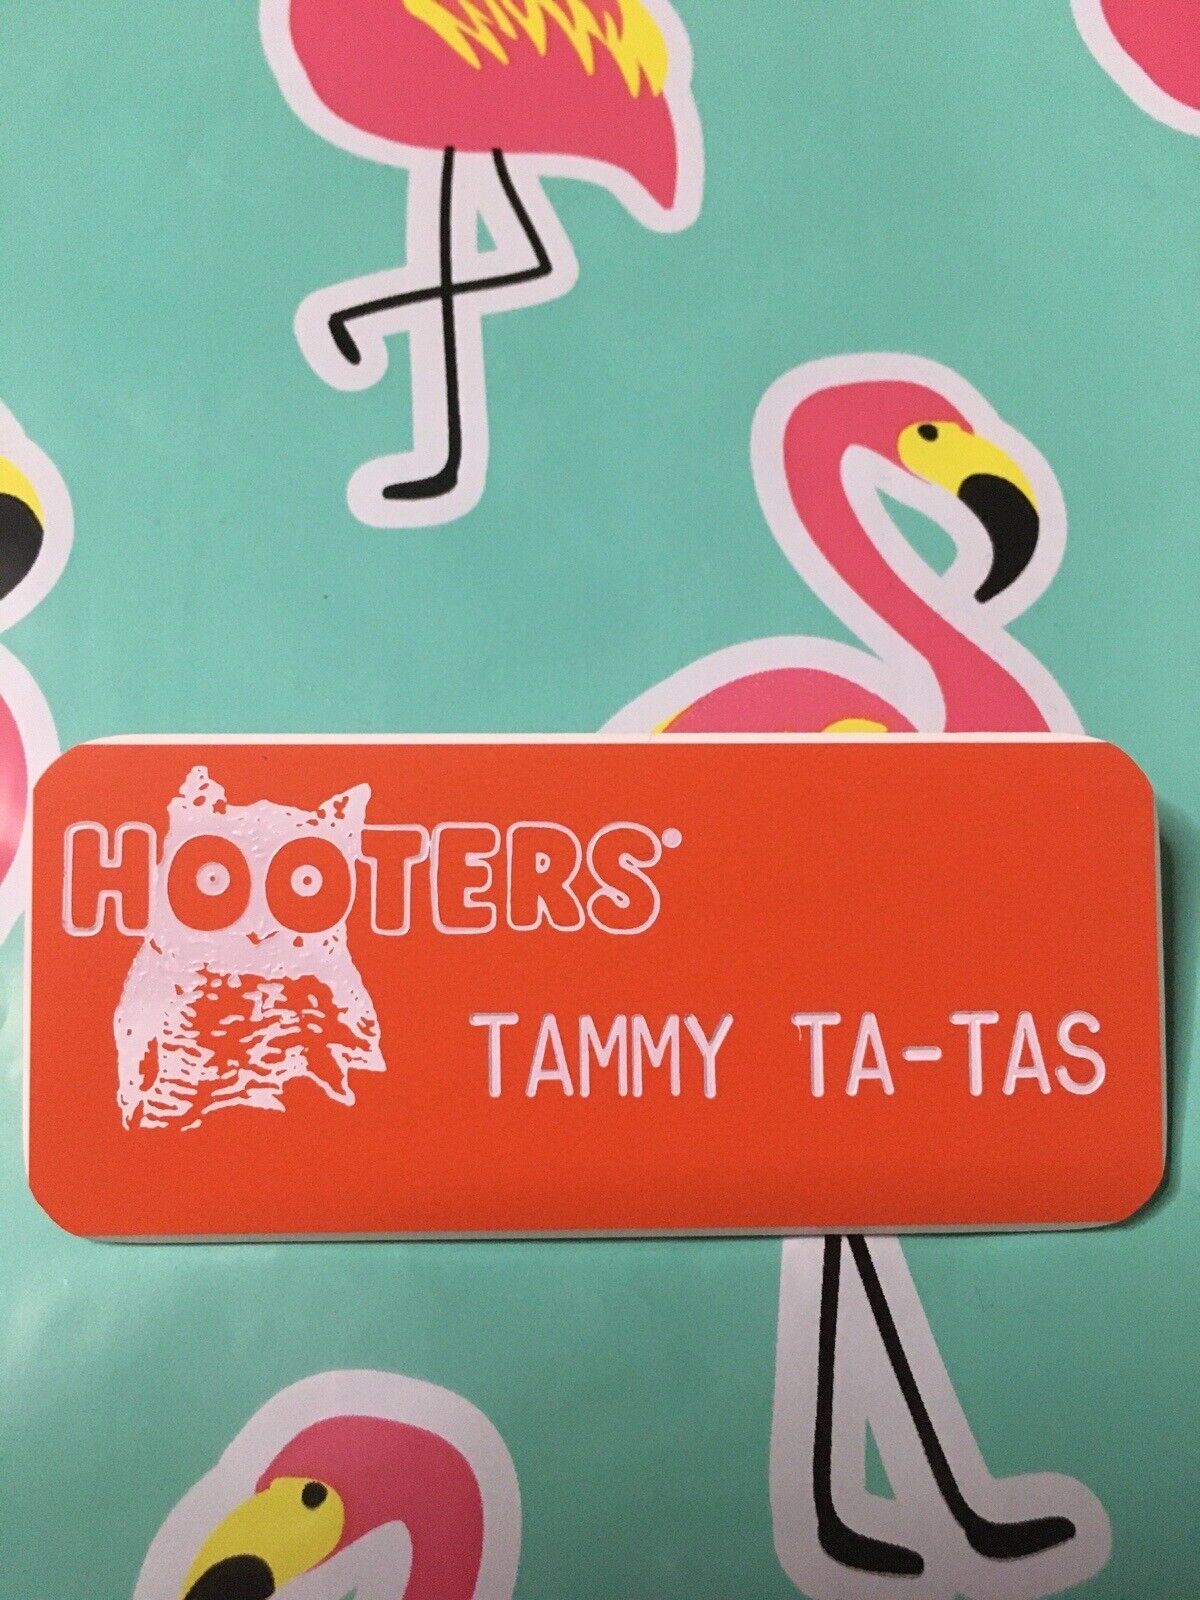 New Hooters Girl Authentic Uniform “Tammy Ta-Tas” Name Tag Halloween Costume